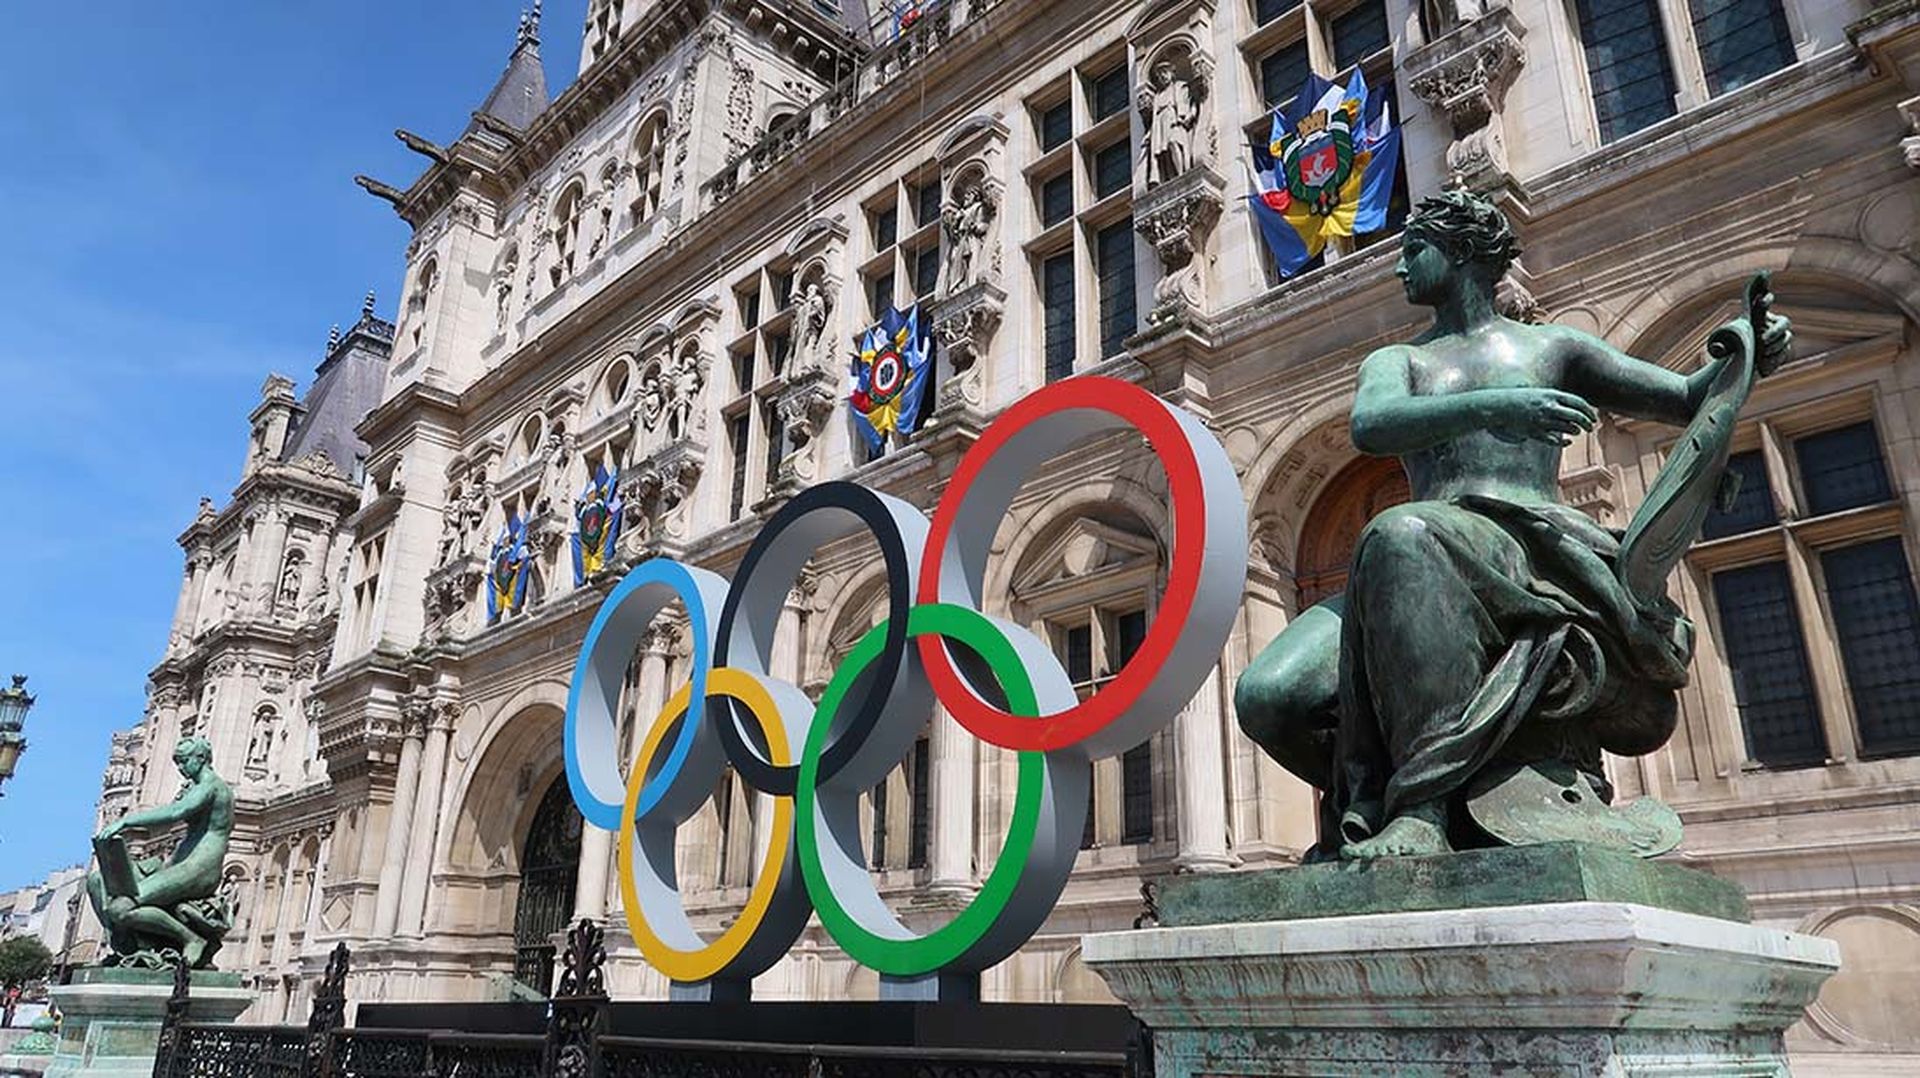 The multi-colored, intertwined Olympic rings are seen outside a hotel in Paris